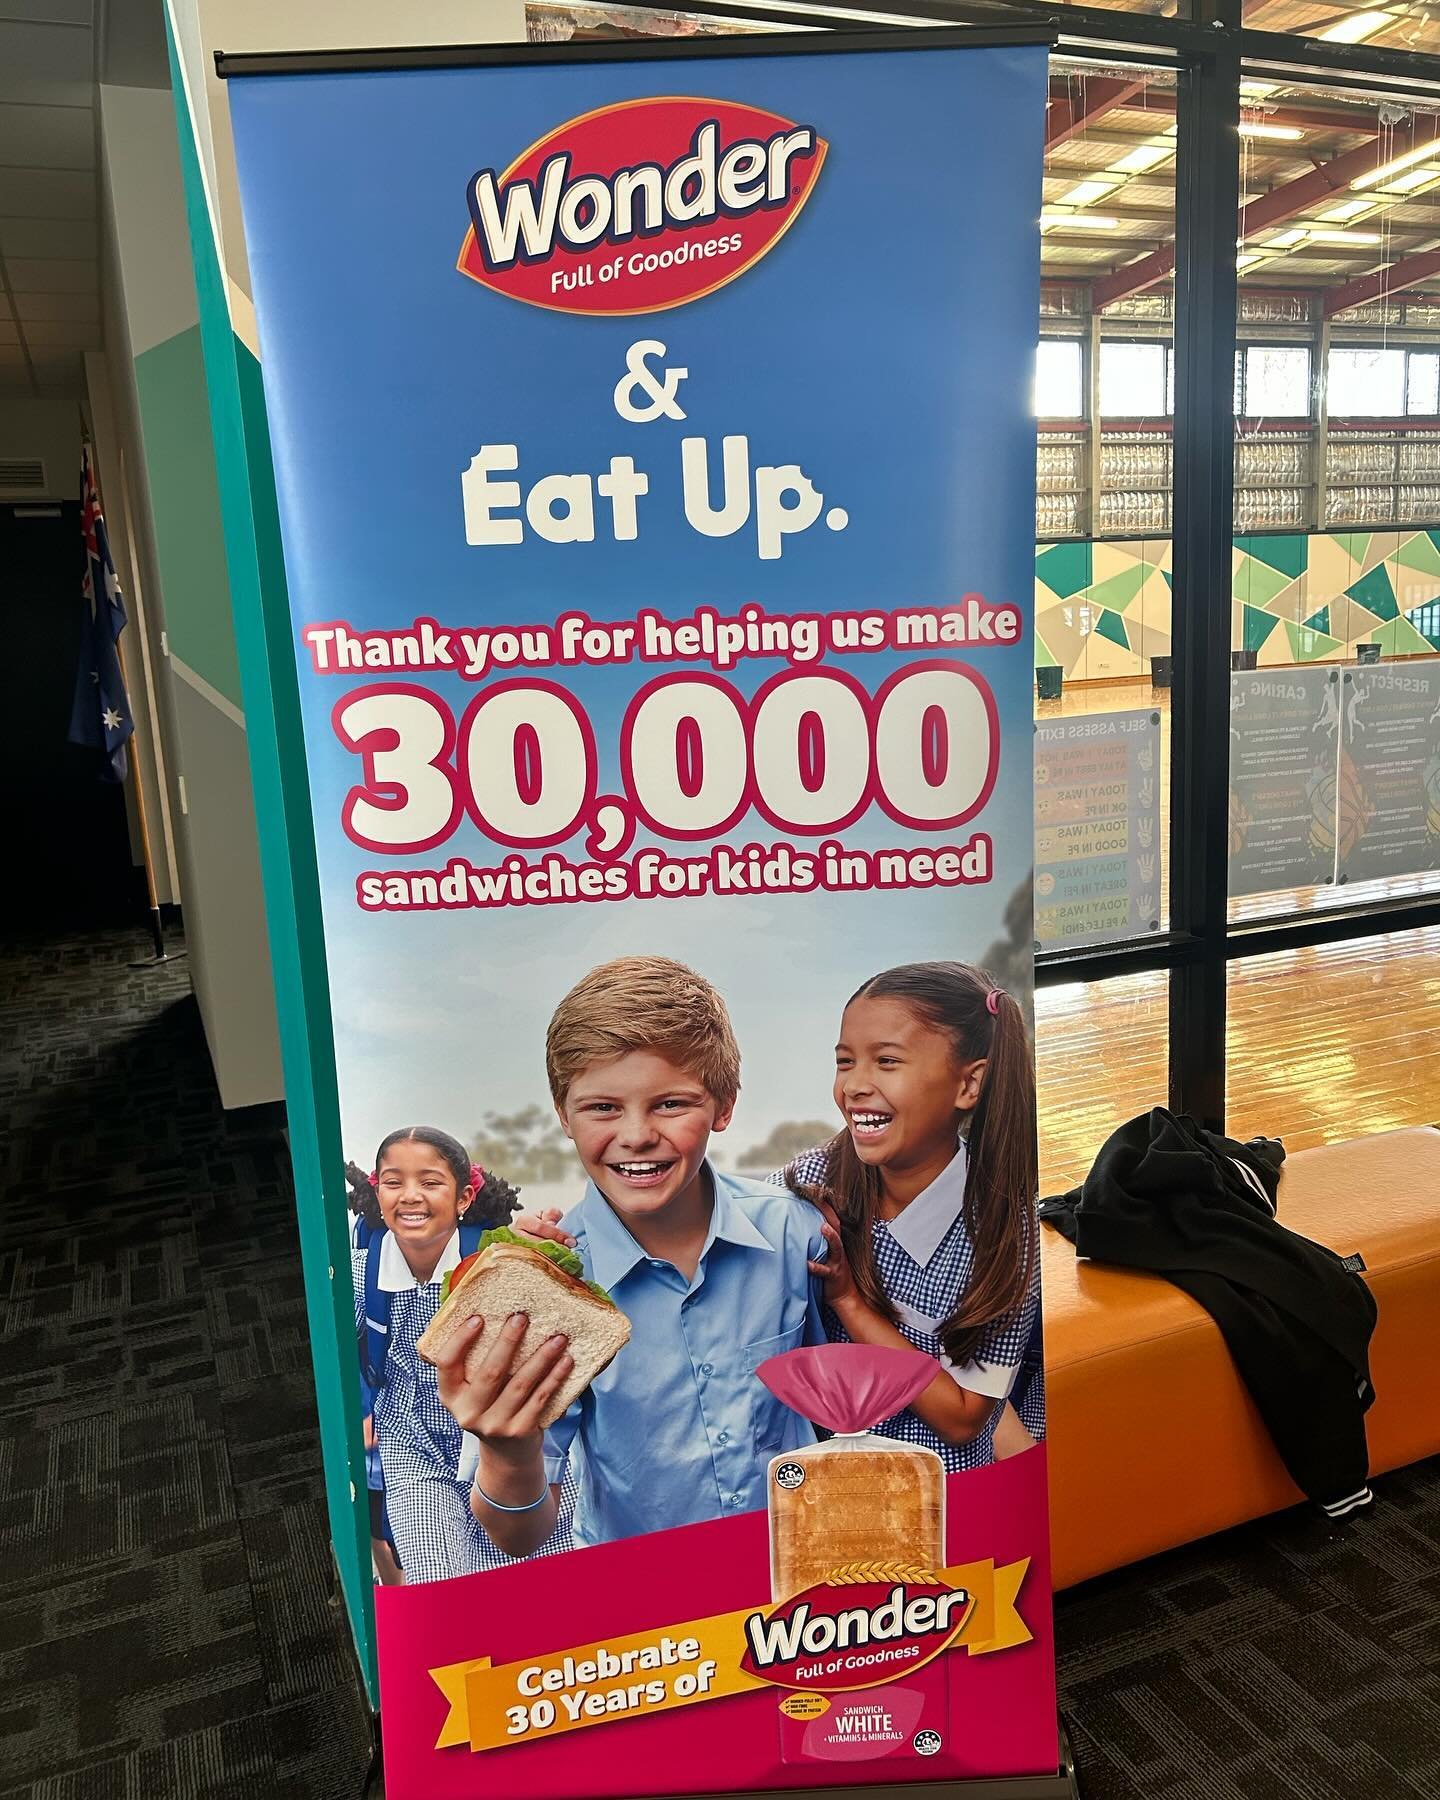 Today I got to work with our Grade 5/6 students as they teamed up with the amazing charity @eatupaustralia to prepare over 1,000 sandwiches. These sandwiches will go to school students across Australia who often go without lunch.

It was awesome to s